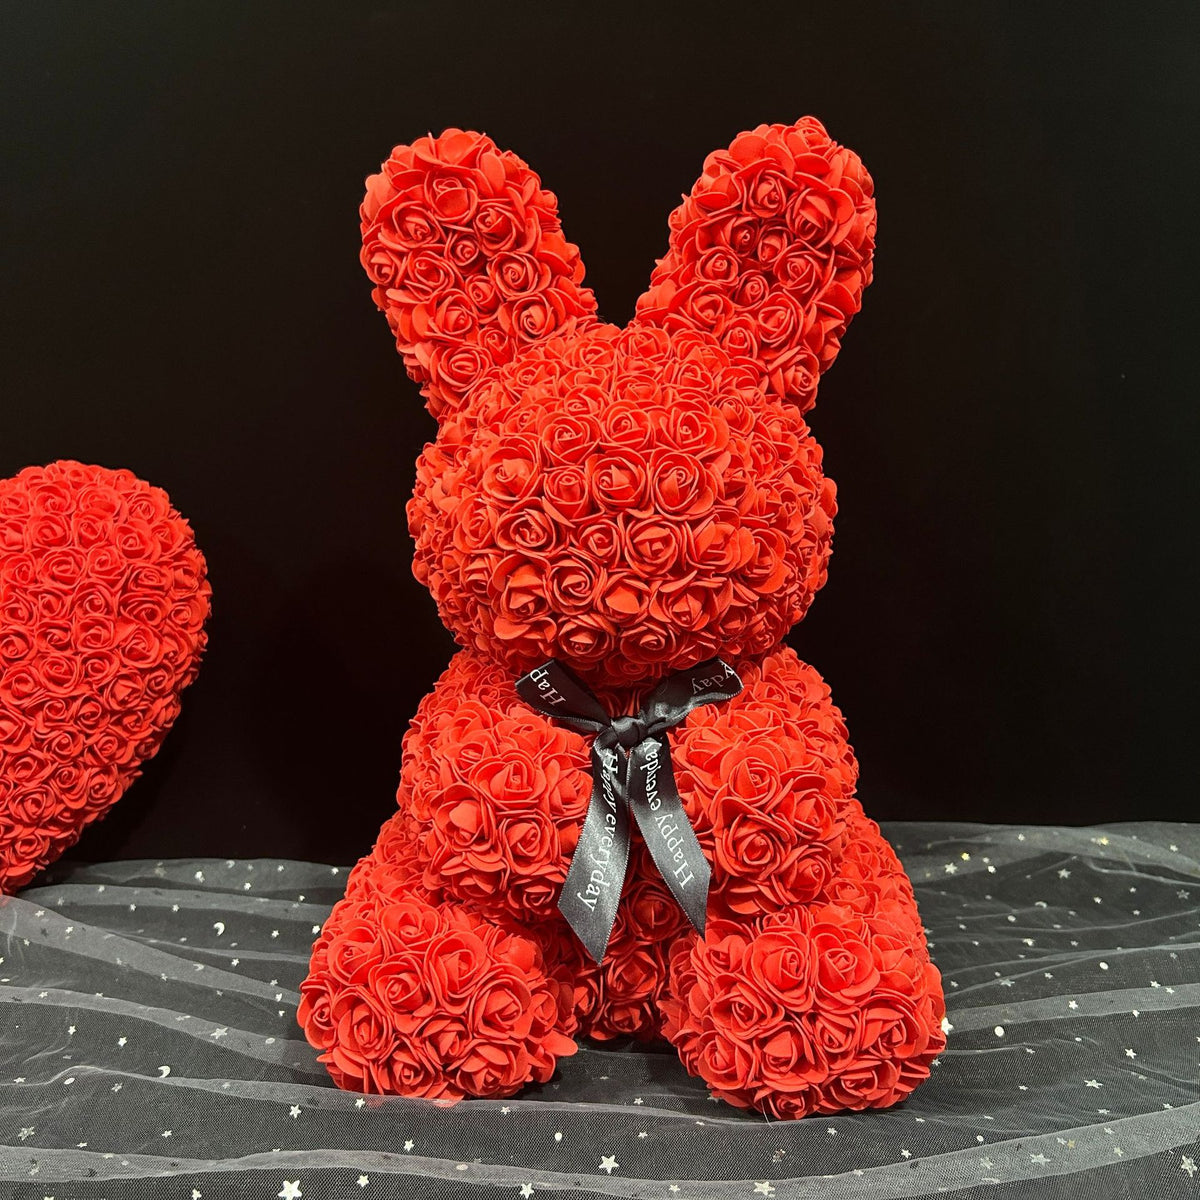 a red teddy bear made out of roses